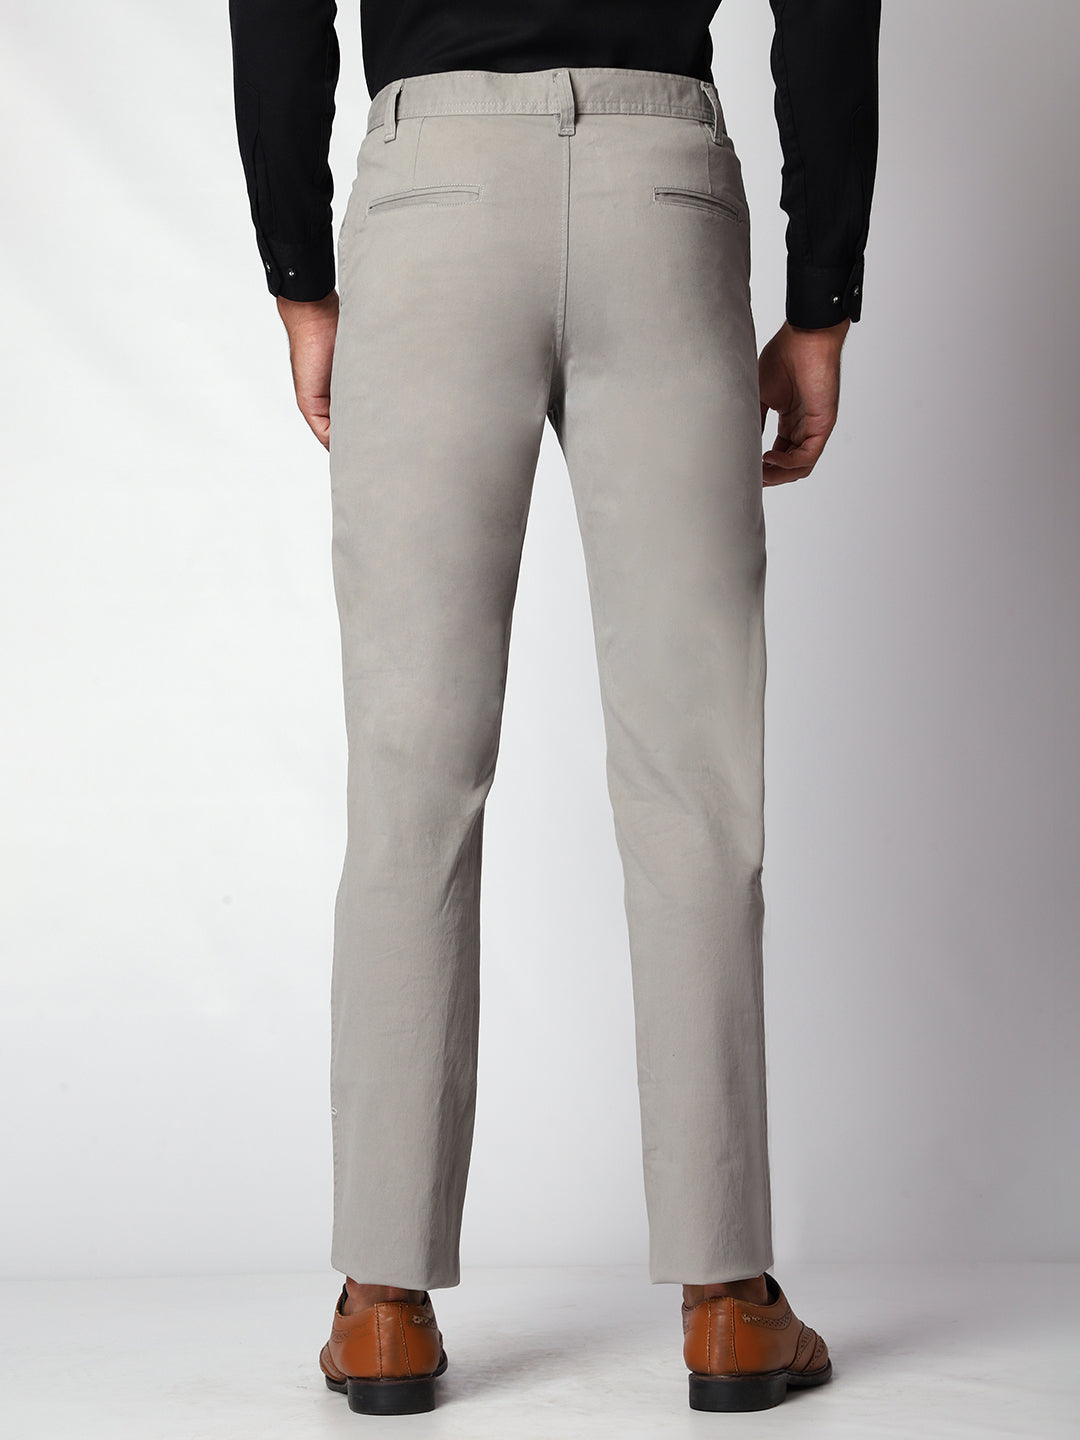 Grey Casual Chinos For Men.